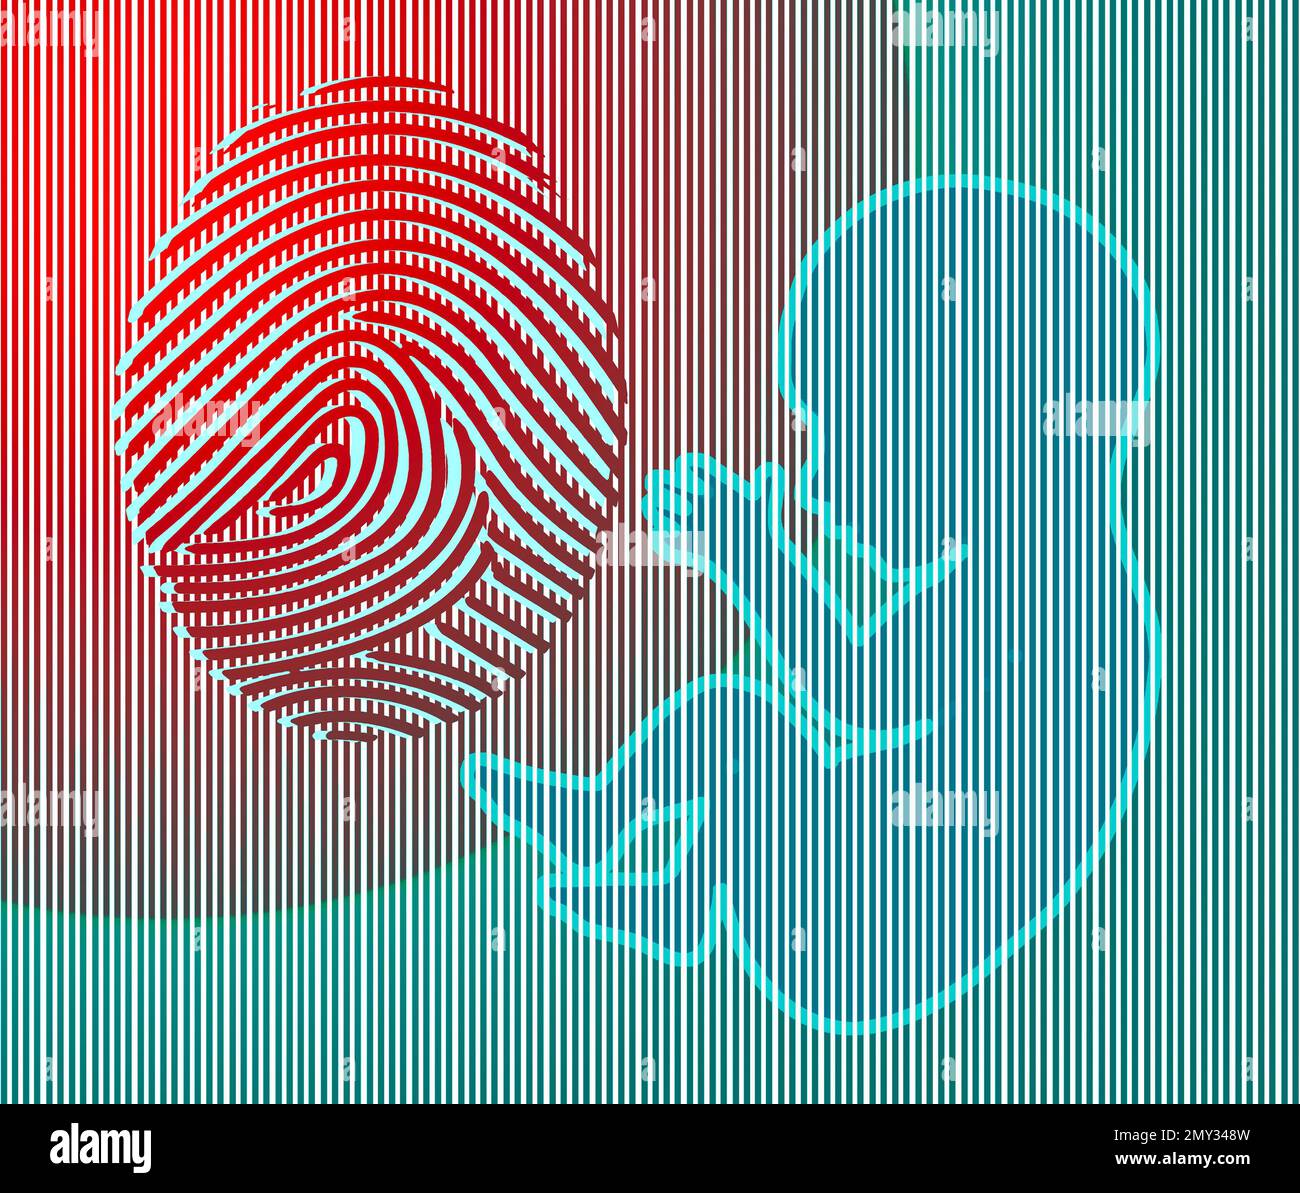 A fingerprint is seen with a human fetus in a 3-d illustration about if or when does a fetus become a human being with regards to abortion rights argu Stock Photo